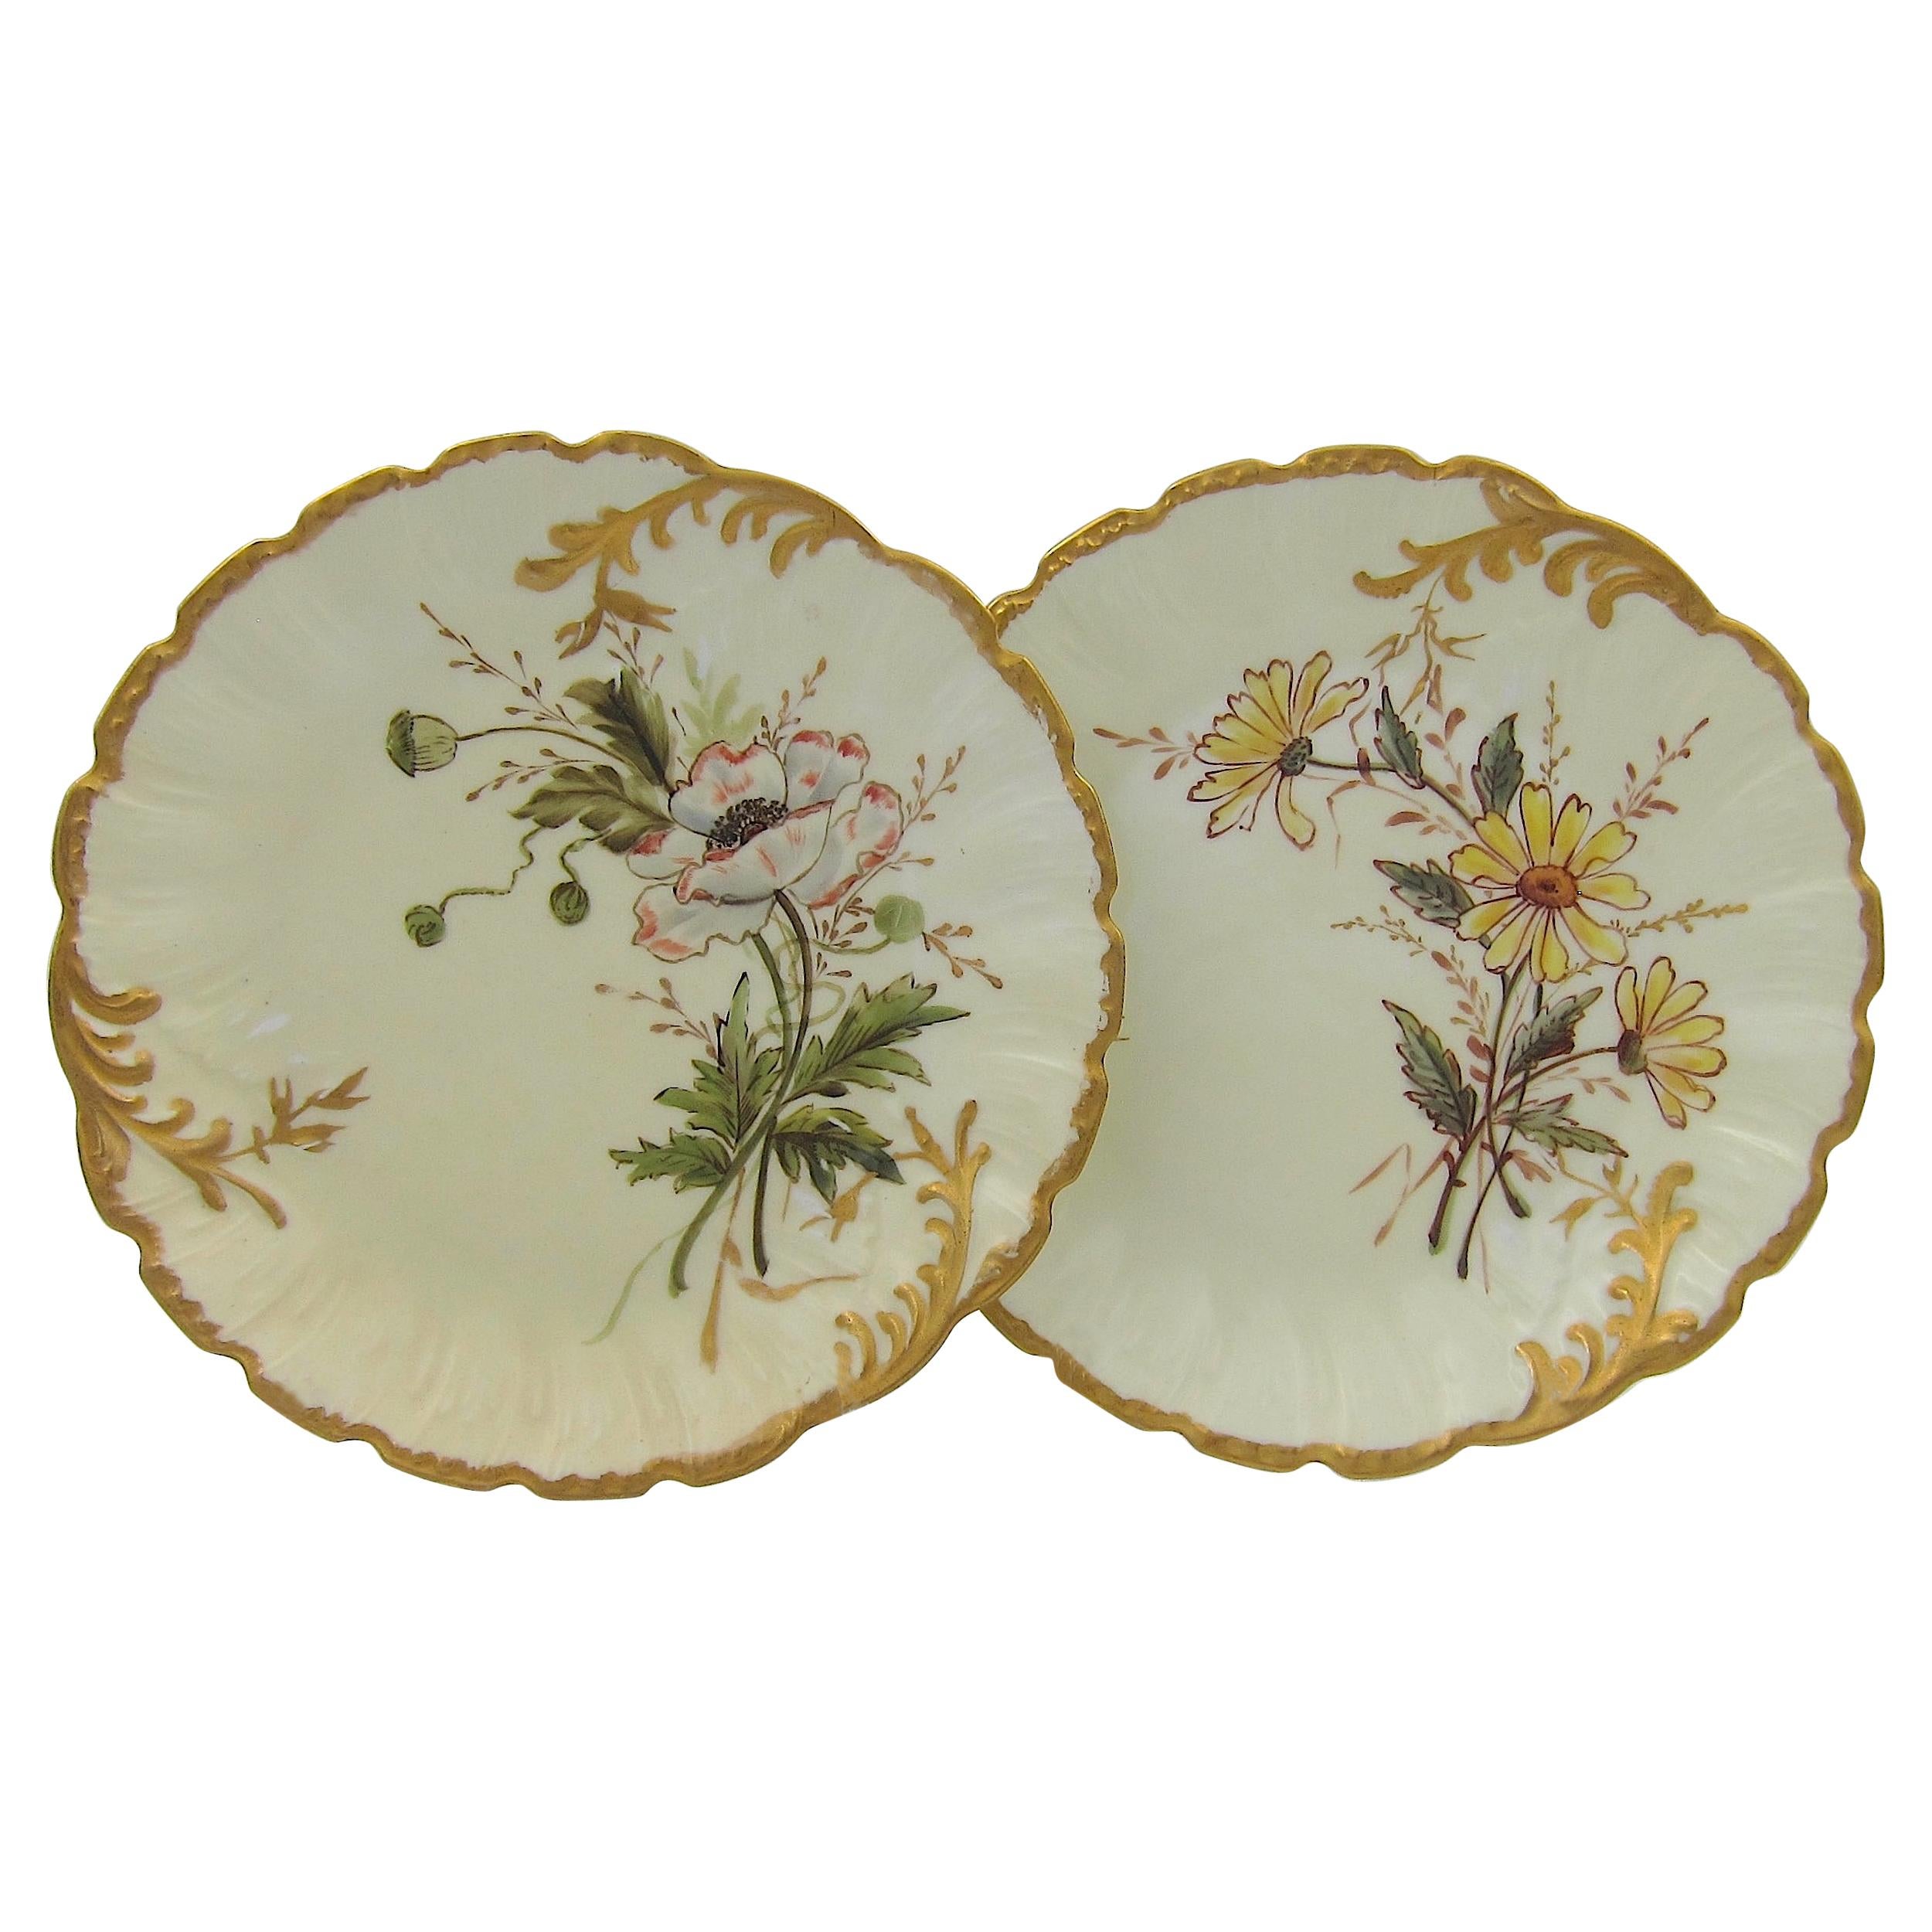 Two French Limoges Porcelain Plates by Martial Redon